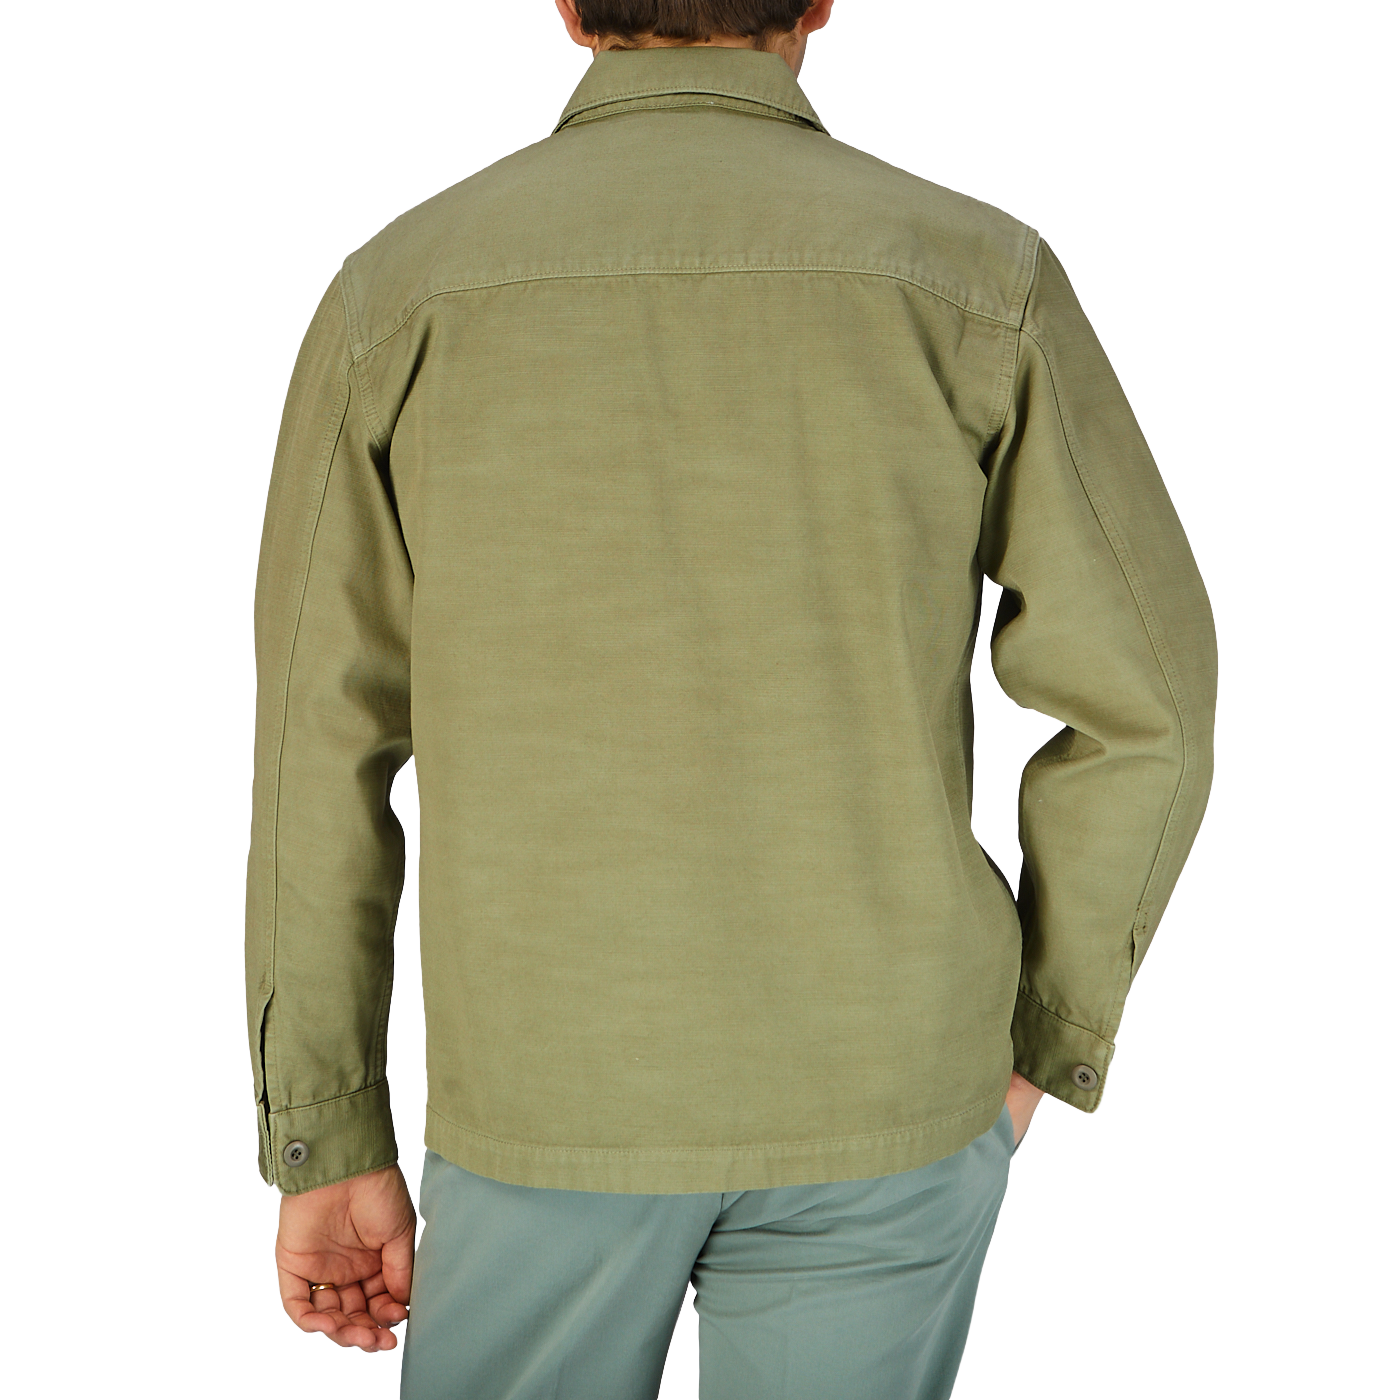 The back view of a man wearing a Grass Green Greto Cotton Overshirt by Tela Genova.